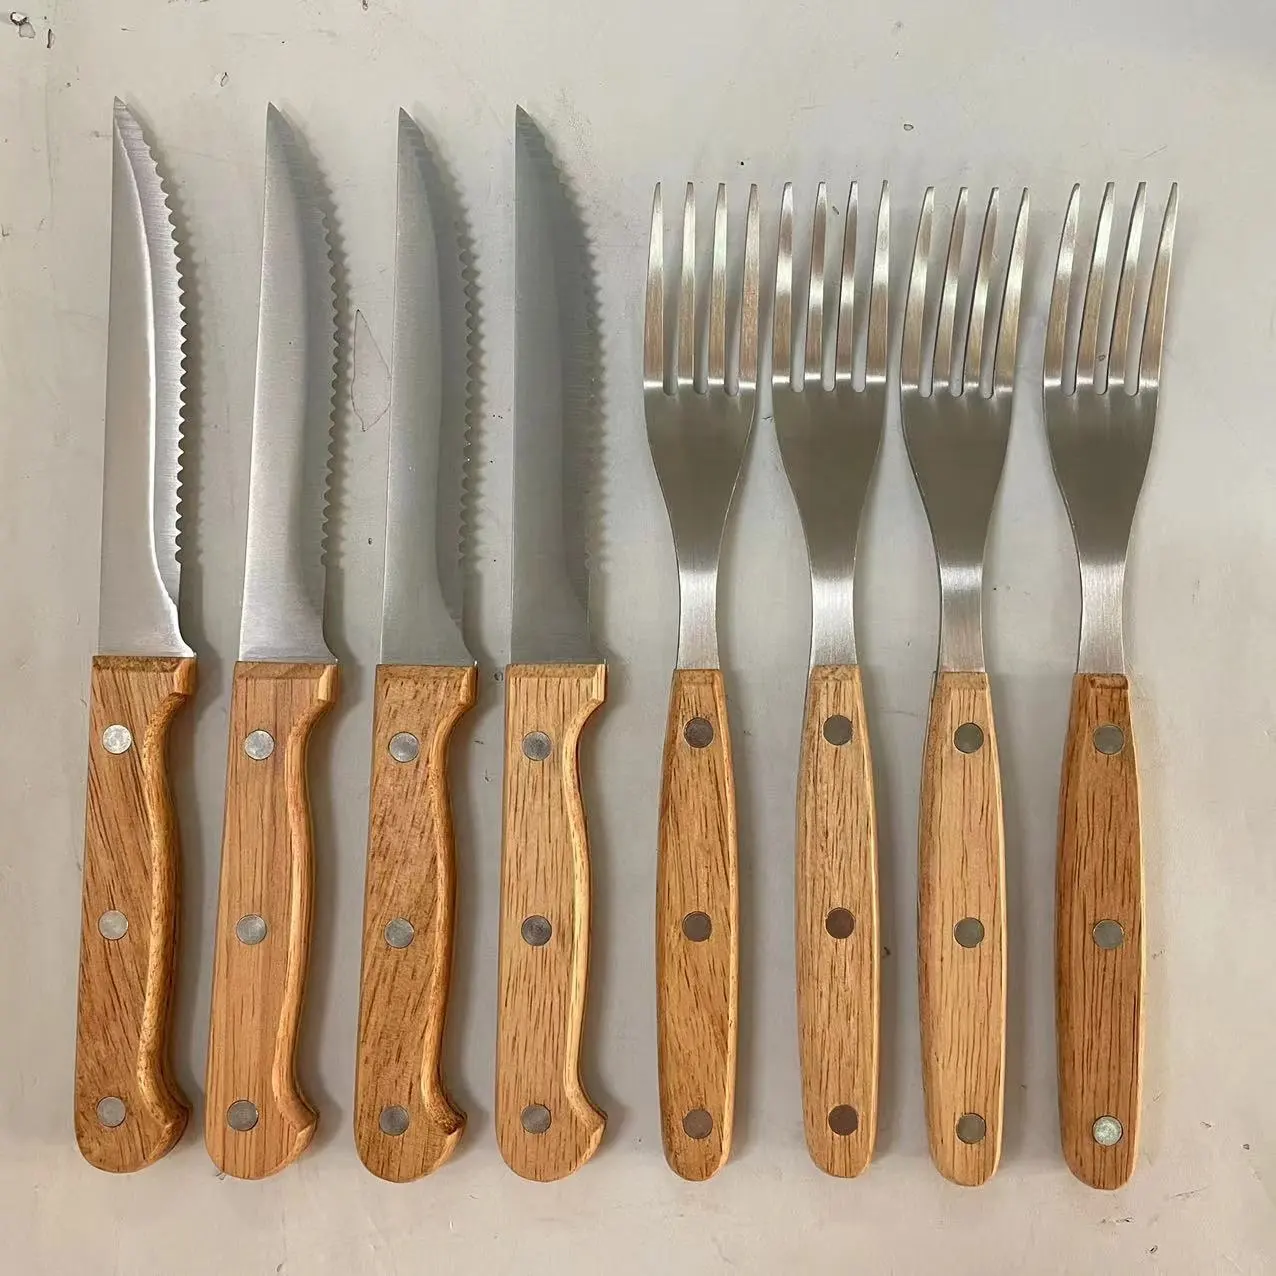 4.5 INCH Kitchen steak knife and fork set stainless steel with wood handle indoor kitchenware customized logo